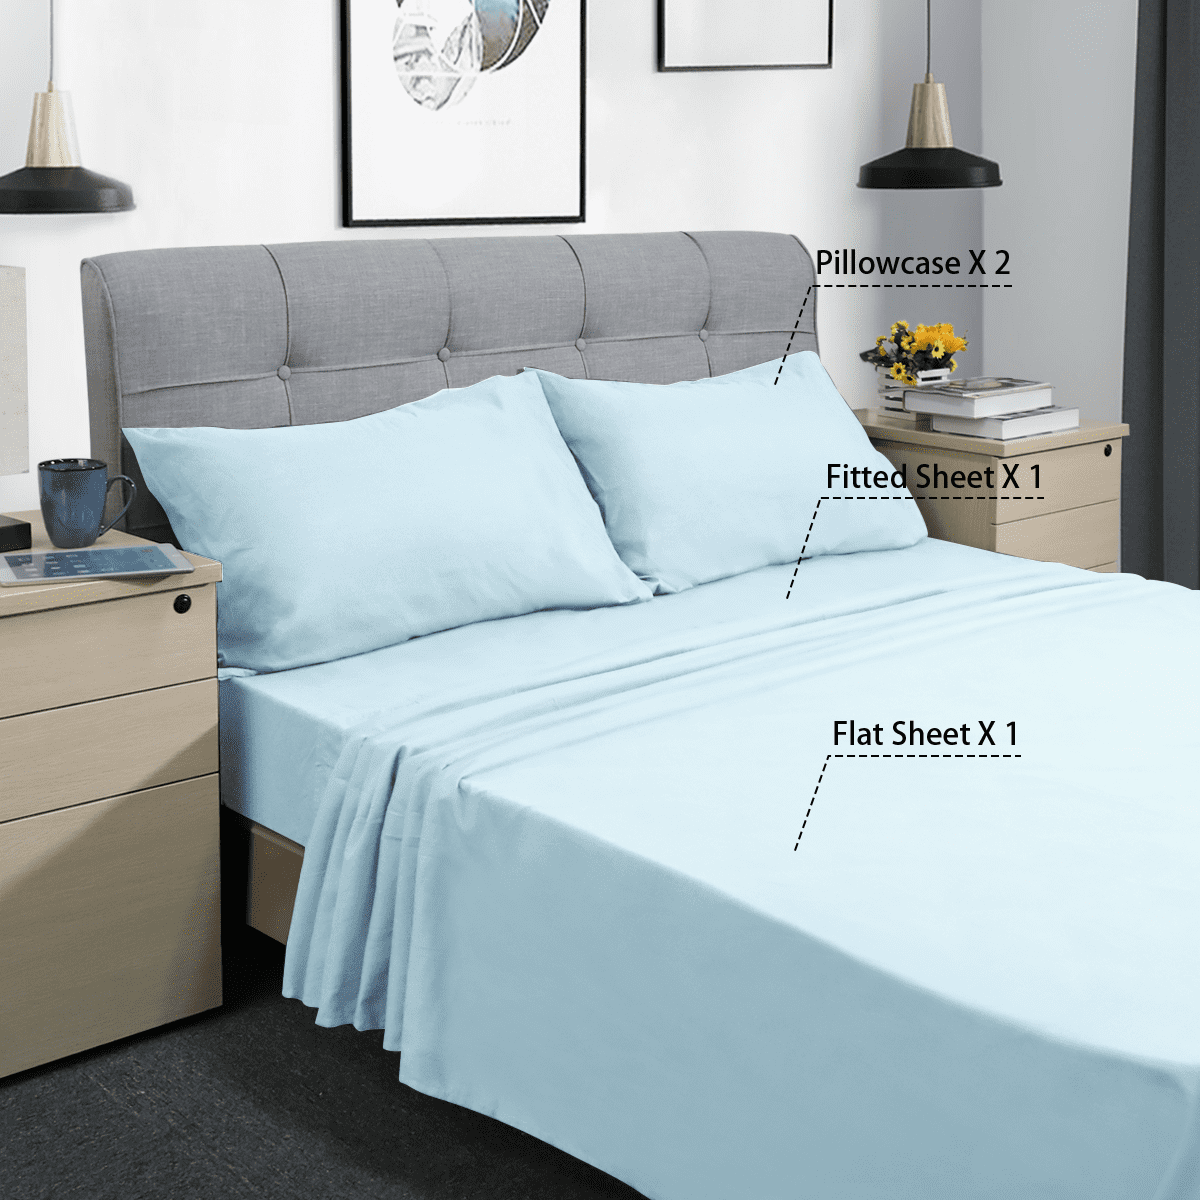 Double, Coral Wrinkle & Fade Free HOMEIDEAS 4 Piece 3-Line Embossed Bed Sheets Set Extra Soft Brushed Microfiber 1800 Bedding Sheets Deep Pocket 